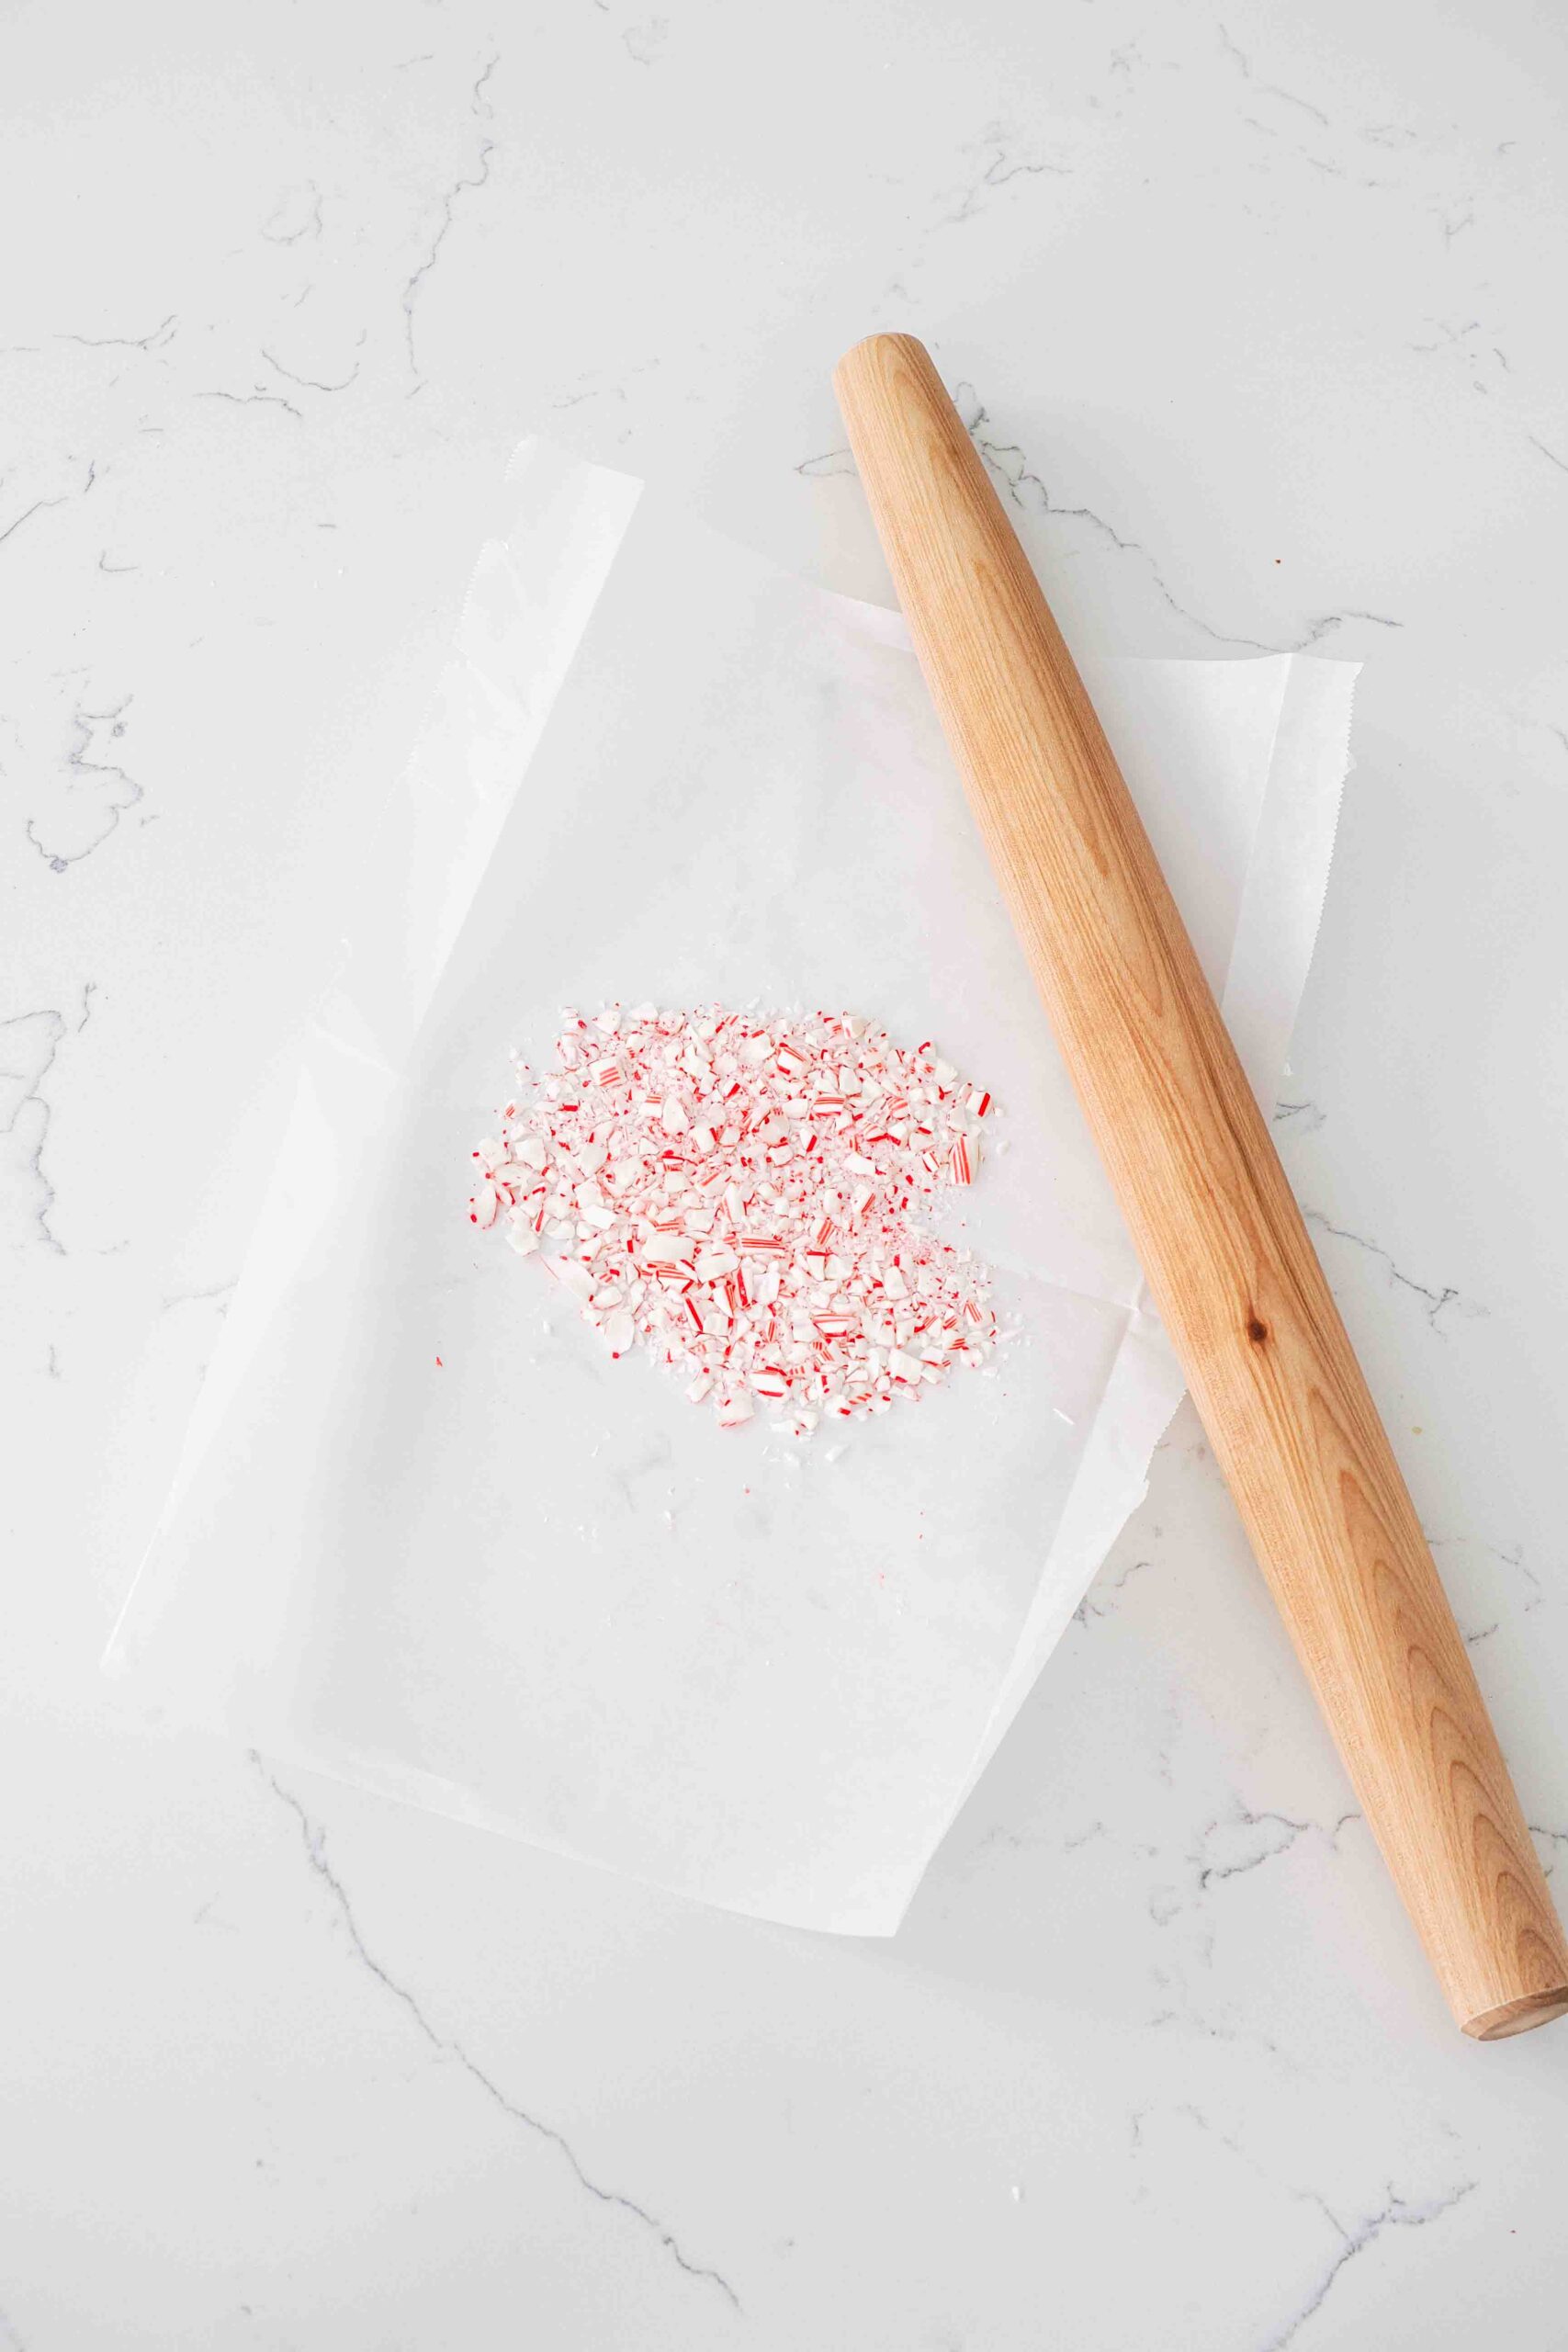 Crushed candy canes on parchment paper near a rolling pin.